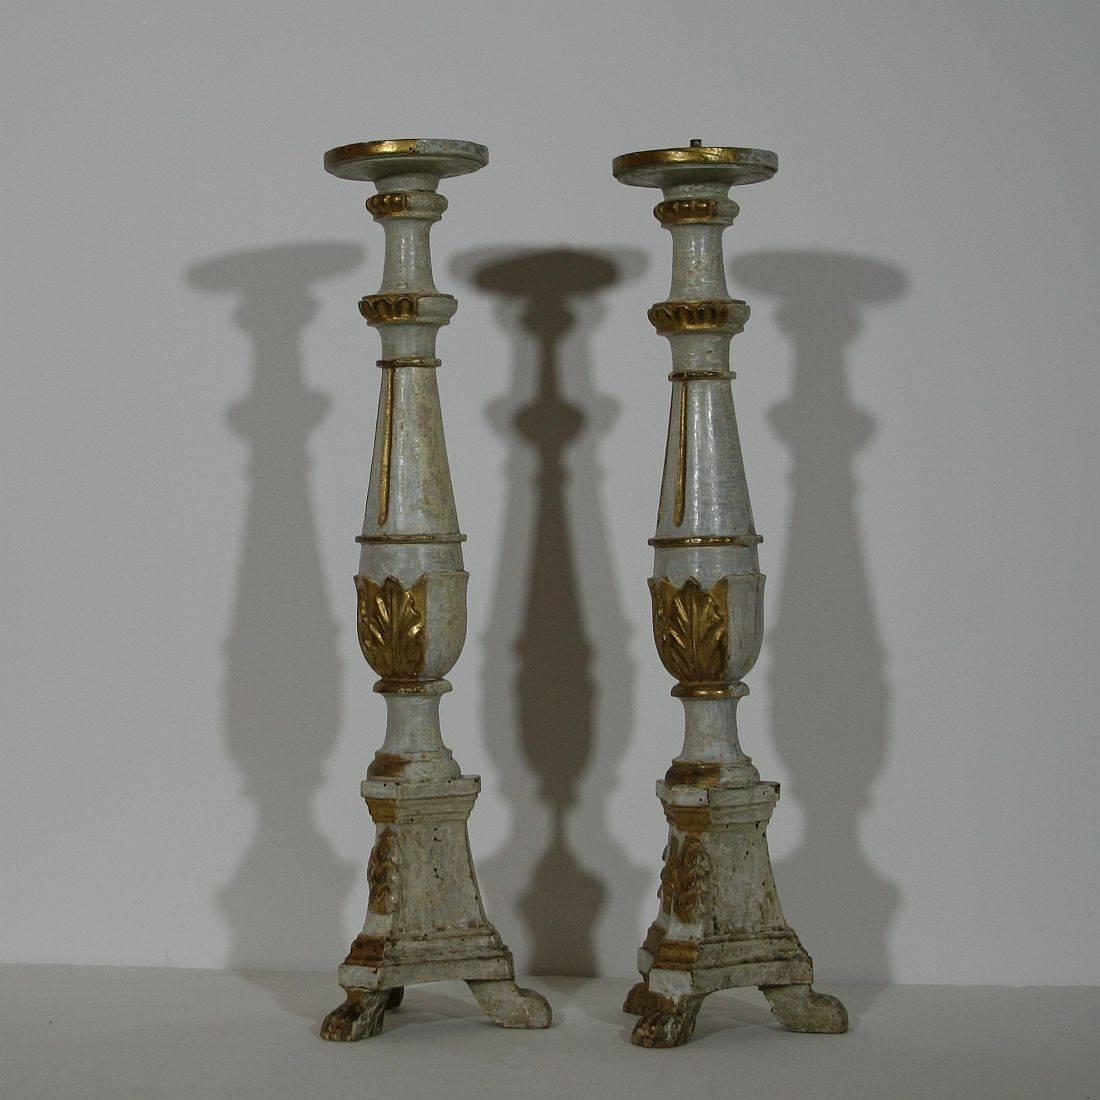 Carved Pair of 18th Century Italian Louis XVI Style Giltwood Altar Candlesticks